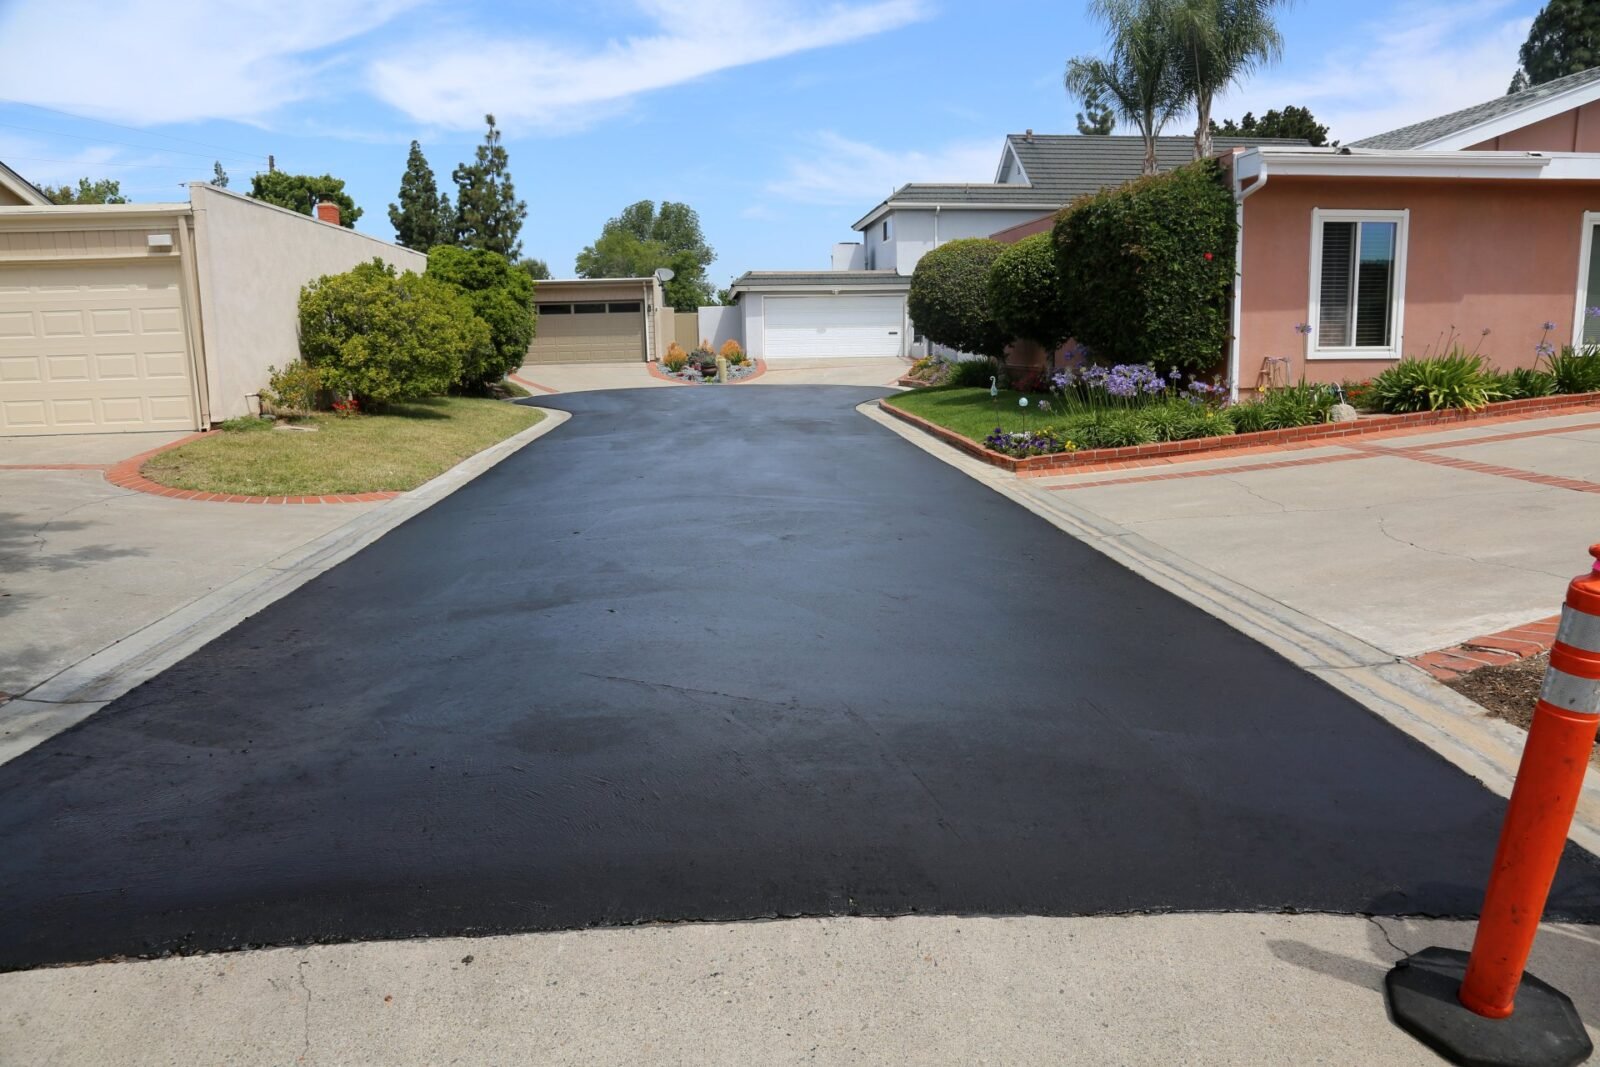 A freshly paved asphalt driveway, expertly completed by Palm Beach Asphalt, leading to two white garages and a beige garage in a residential neighborhood. The driveway is bordered by curbs and landscaped with grass, flowers, and a palm tree. An orange traffic cone is visible in the foreground. Get your free quote today!